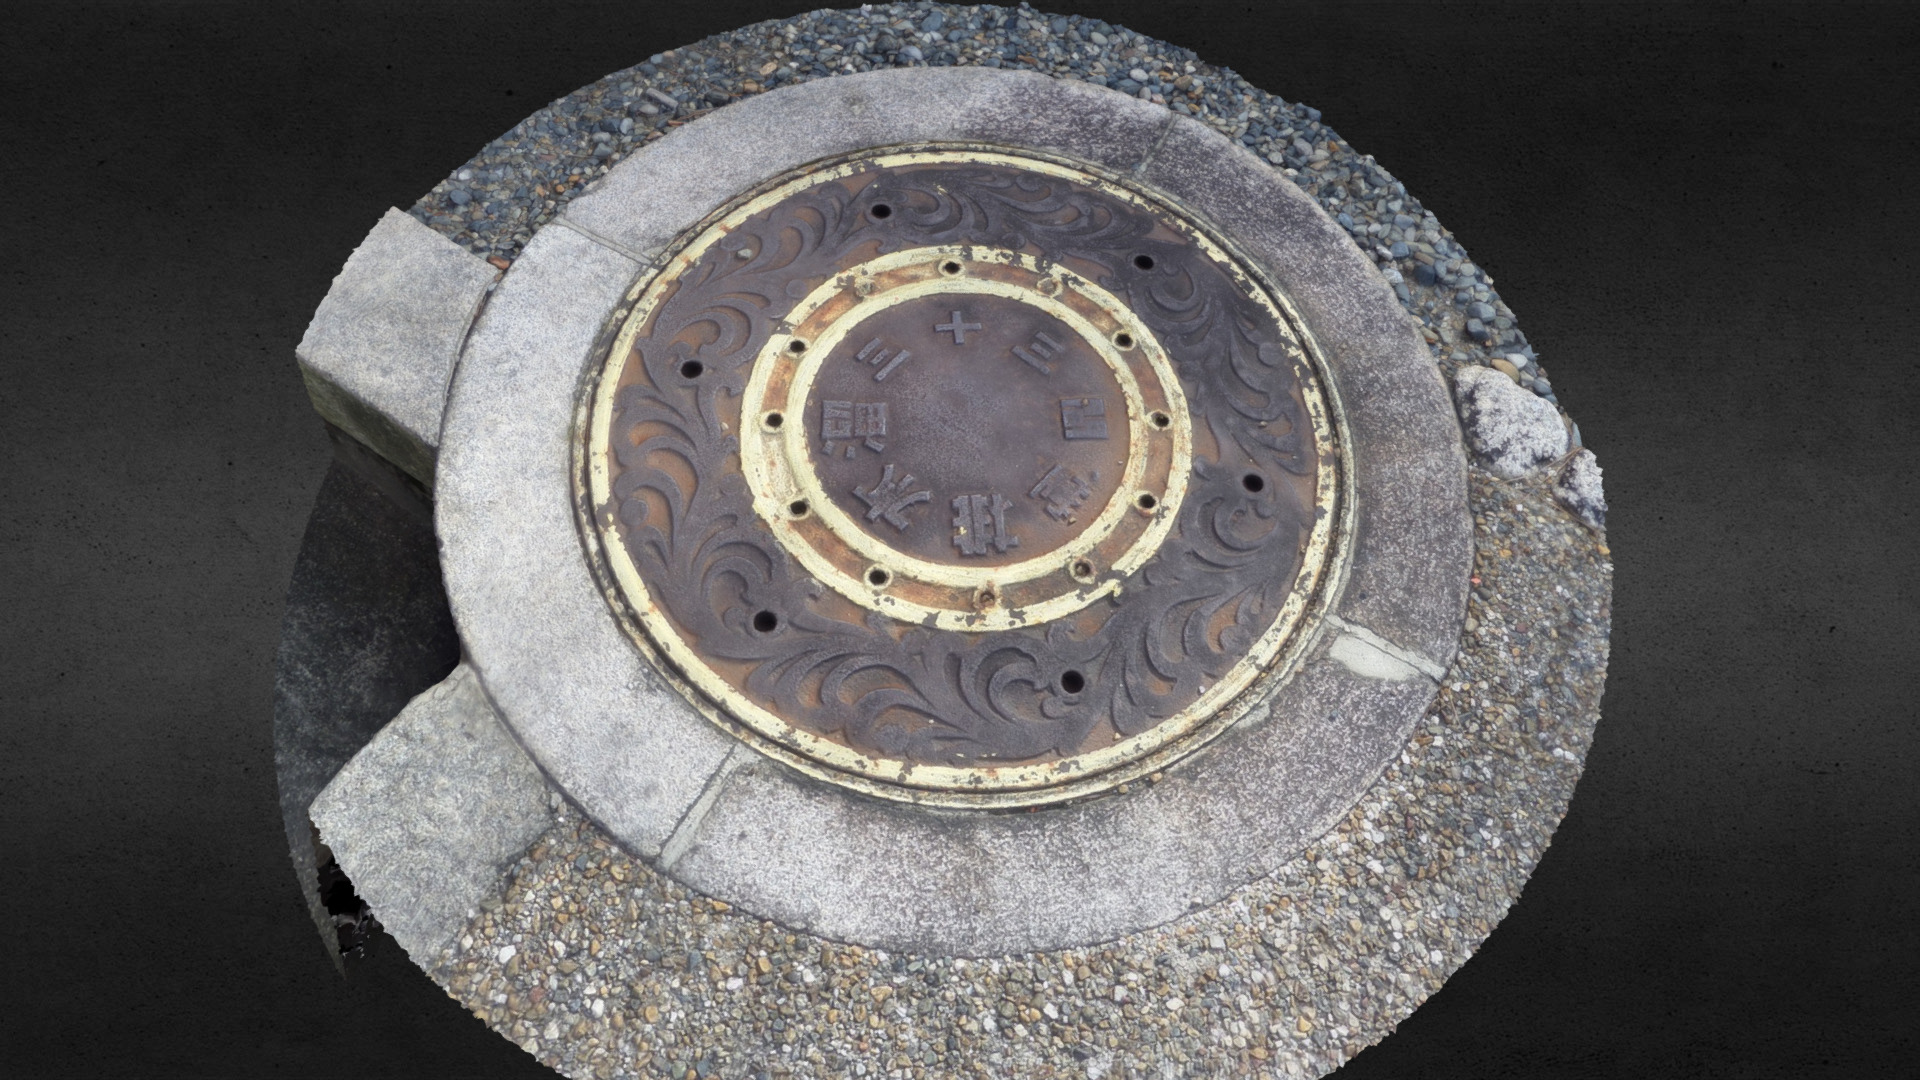 3D model Kyoto Sewer Plate - This is a 3D model of the Kyoto Sewer Plate. The 3D model is about a round metal object with a round metal object on top.